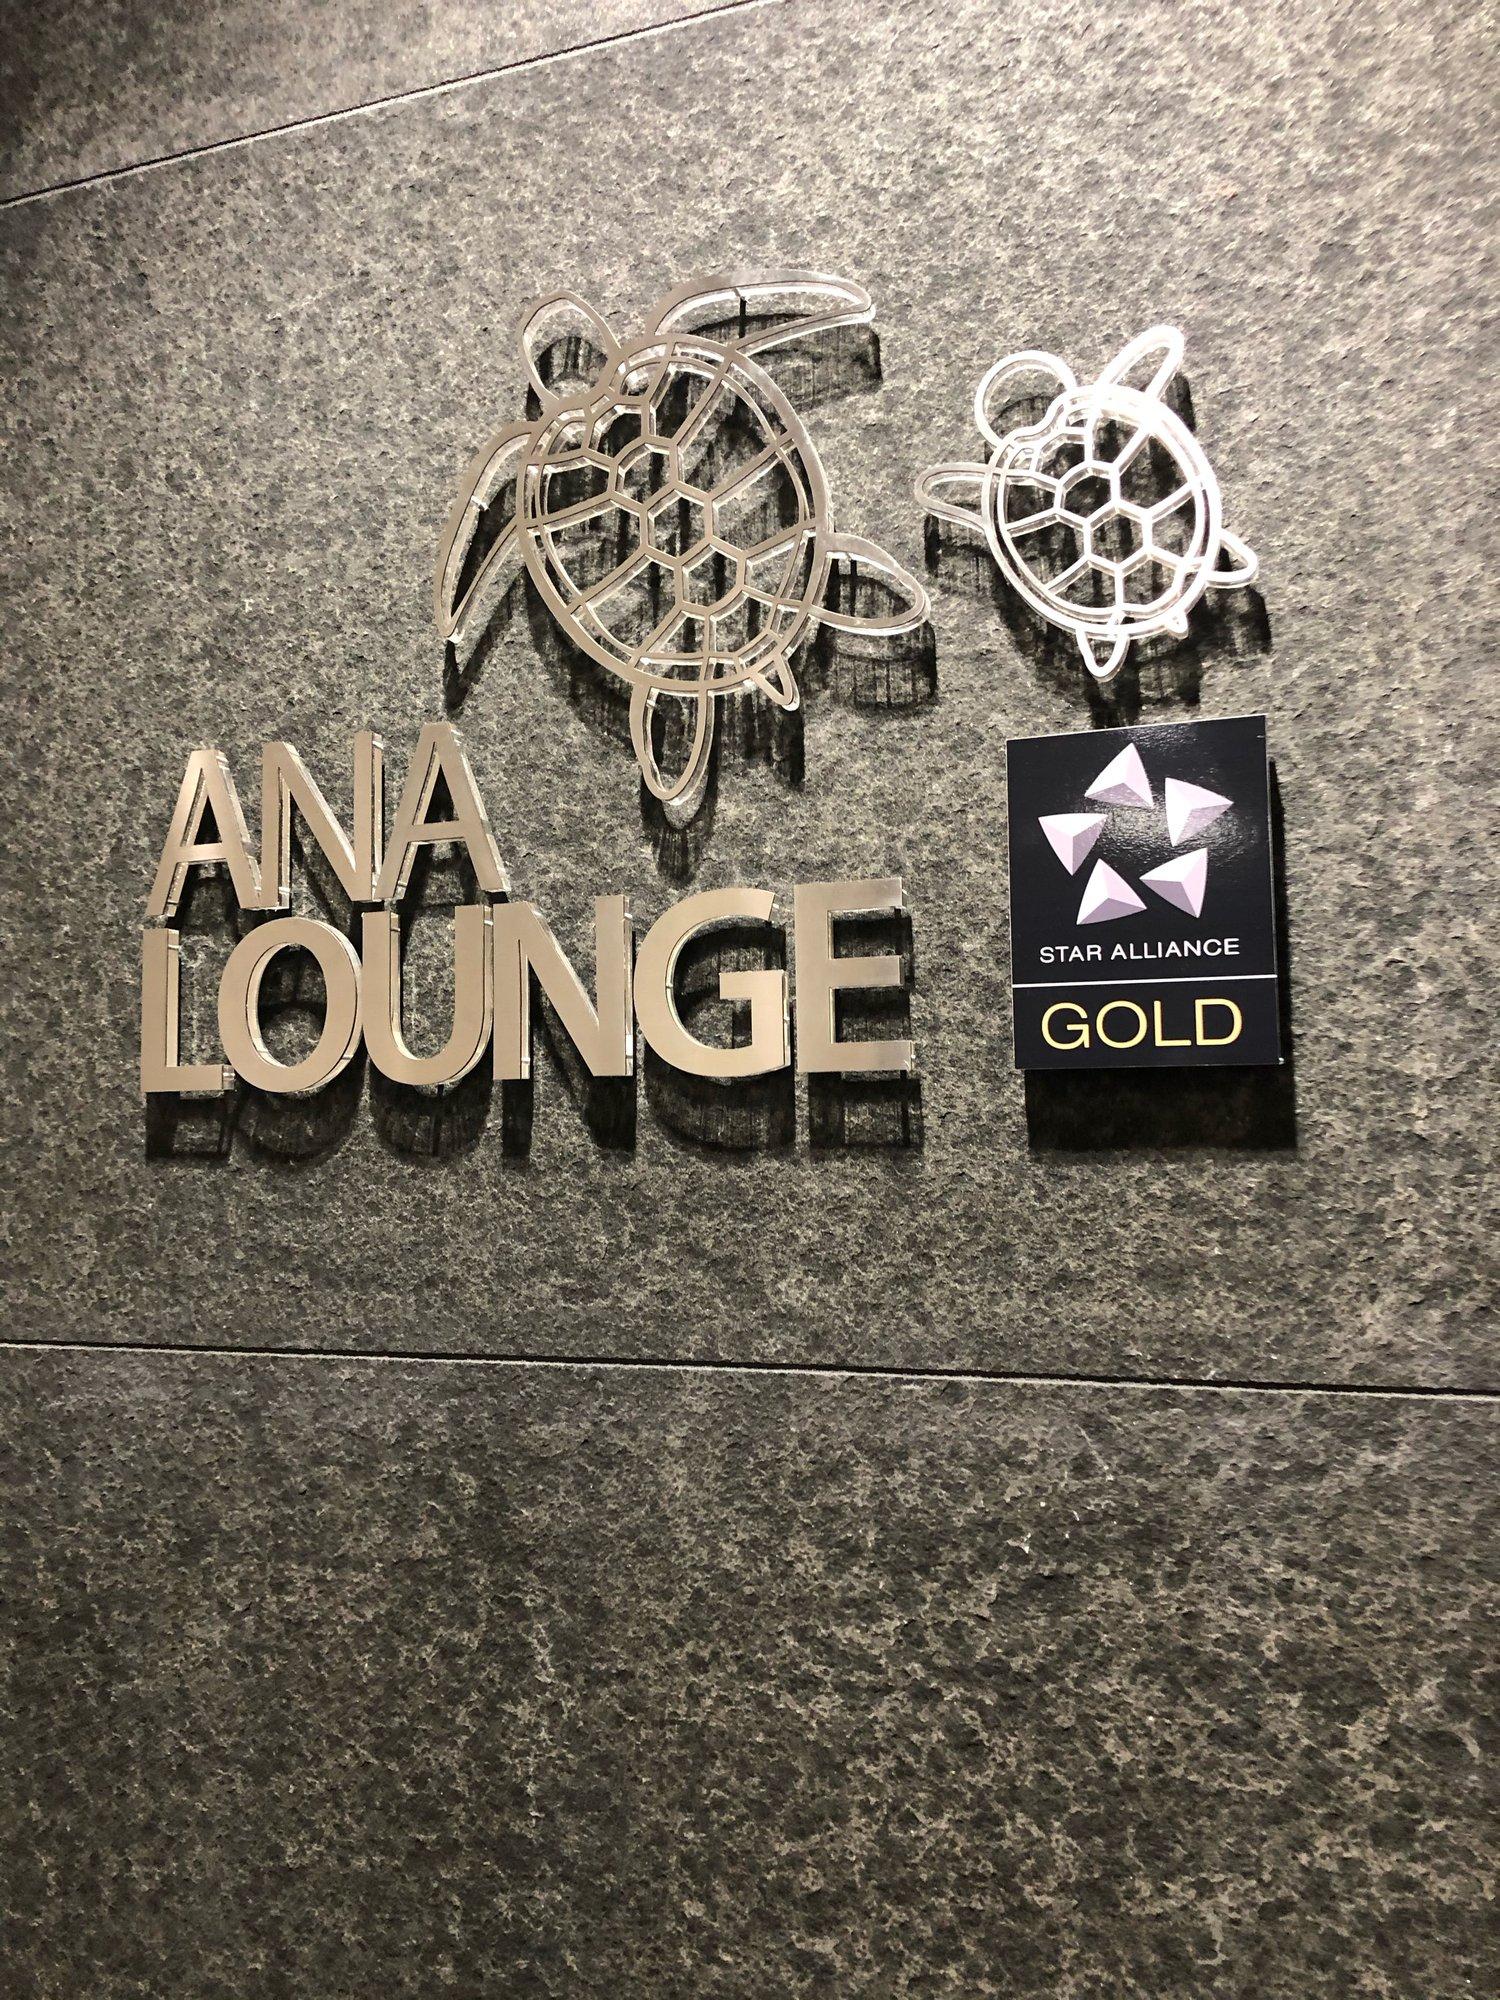 All Nippon Airways ANA Lounge image 1 of 2